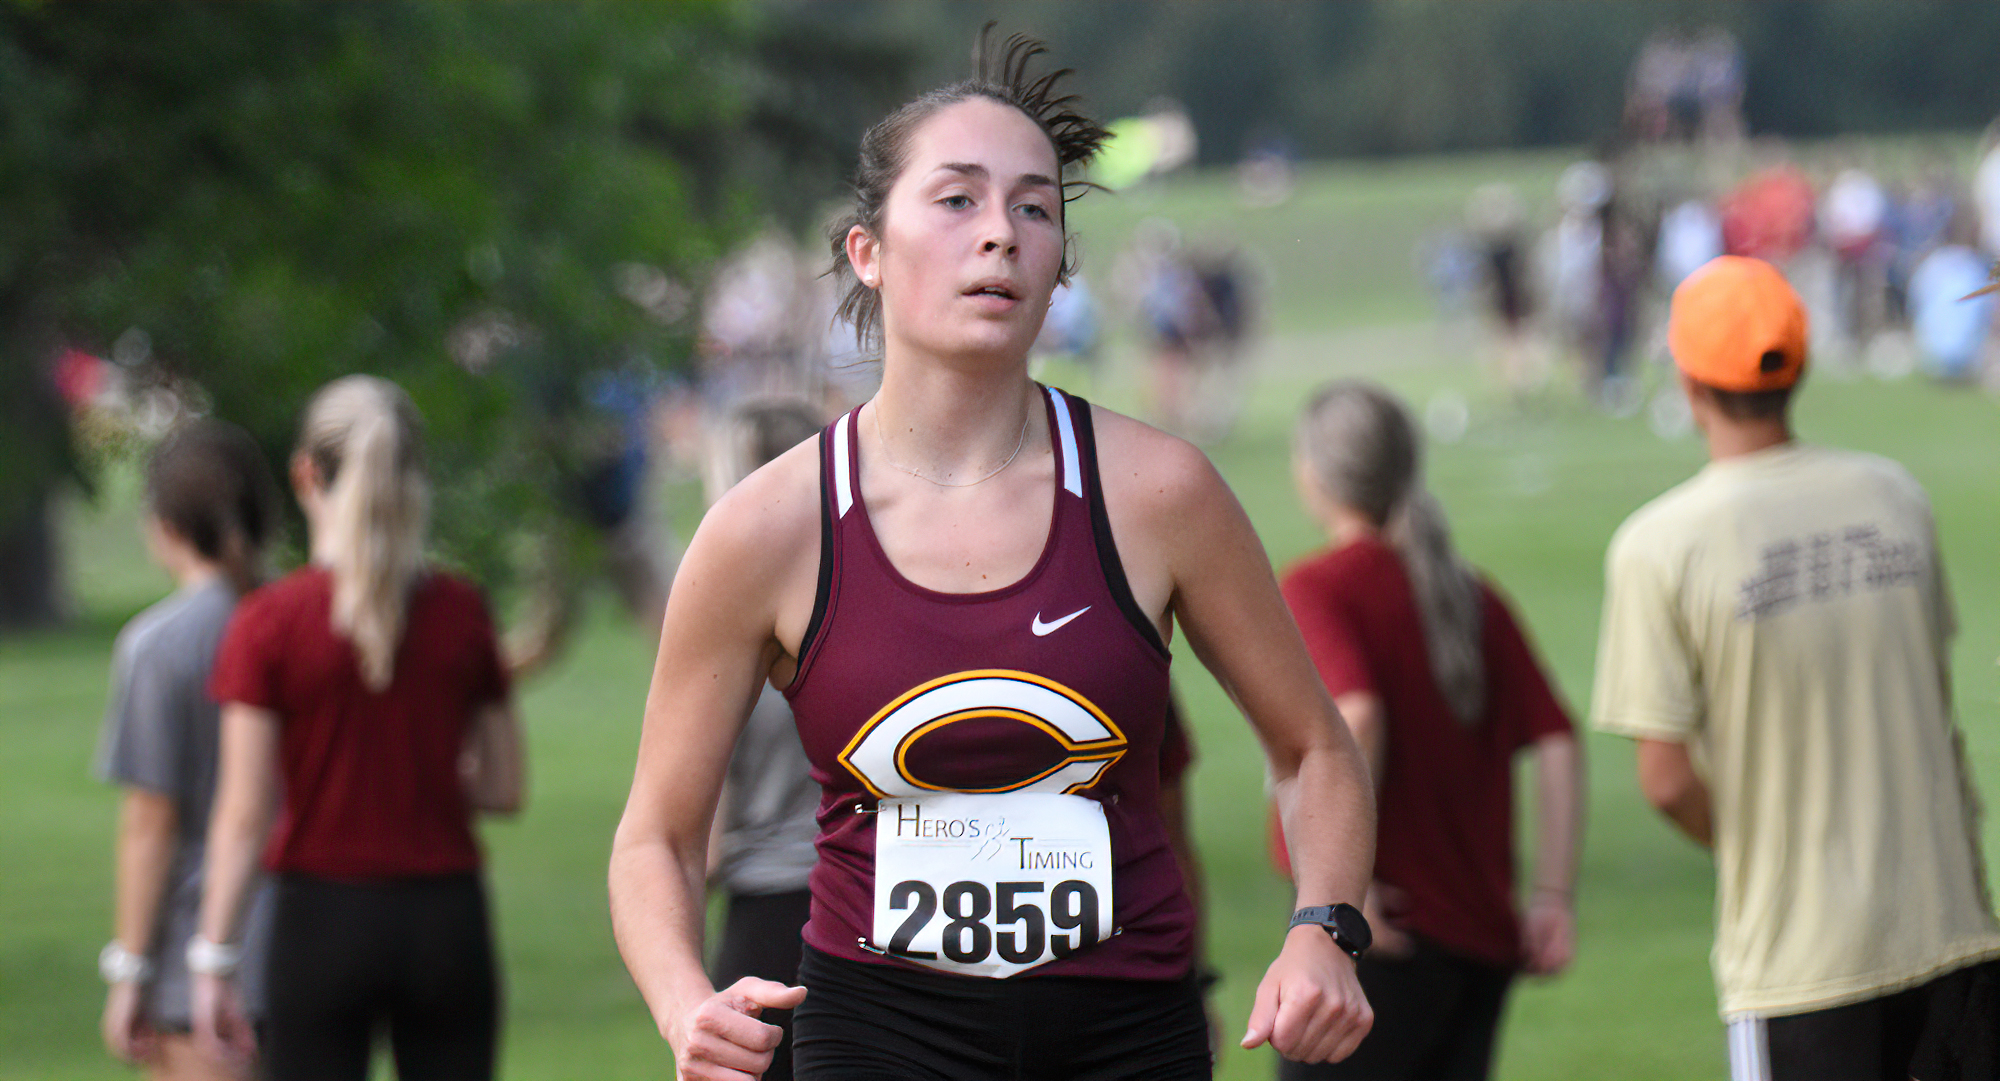 Isabel Fredrickson led Concordia at the NCAA North Regional Meet. She clocked a time of 23:28.29 and was one of two CC runners in the Top 100.